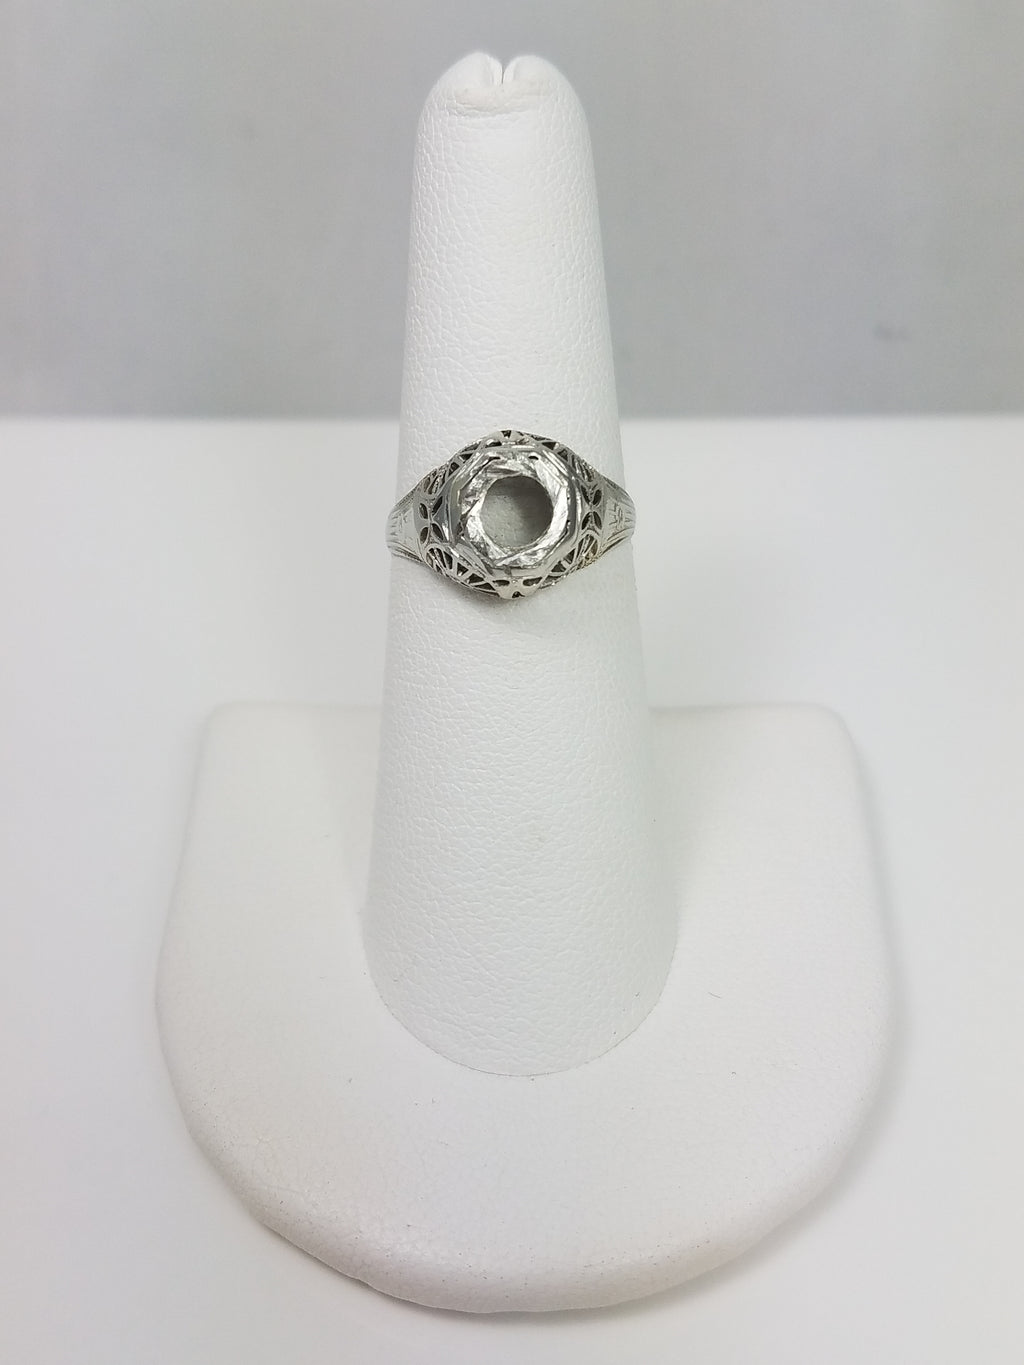 Early 1900's Birks 18k White Gold Engagement Ring Mount To Restore